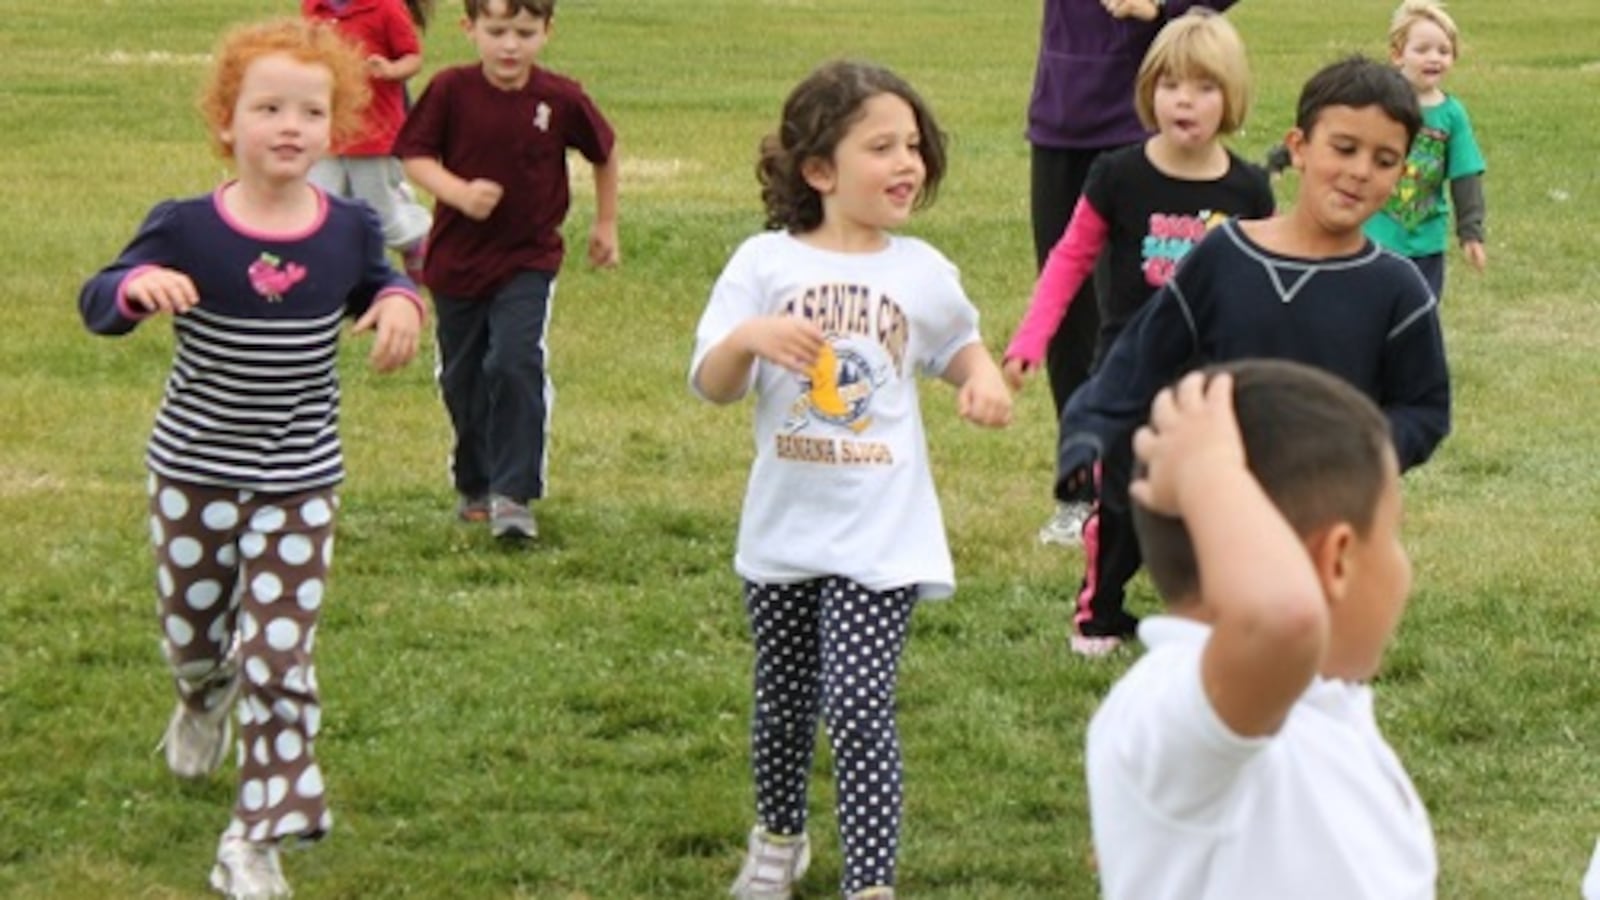 Kindergarten students participate in the fun run at Lowry Elementary School in Denver last year.